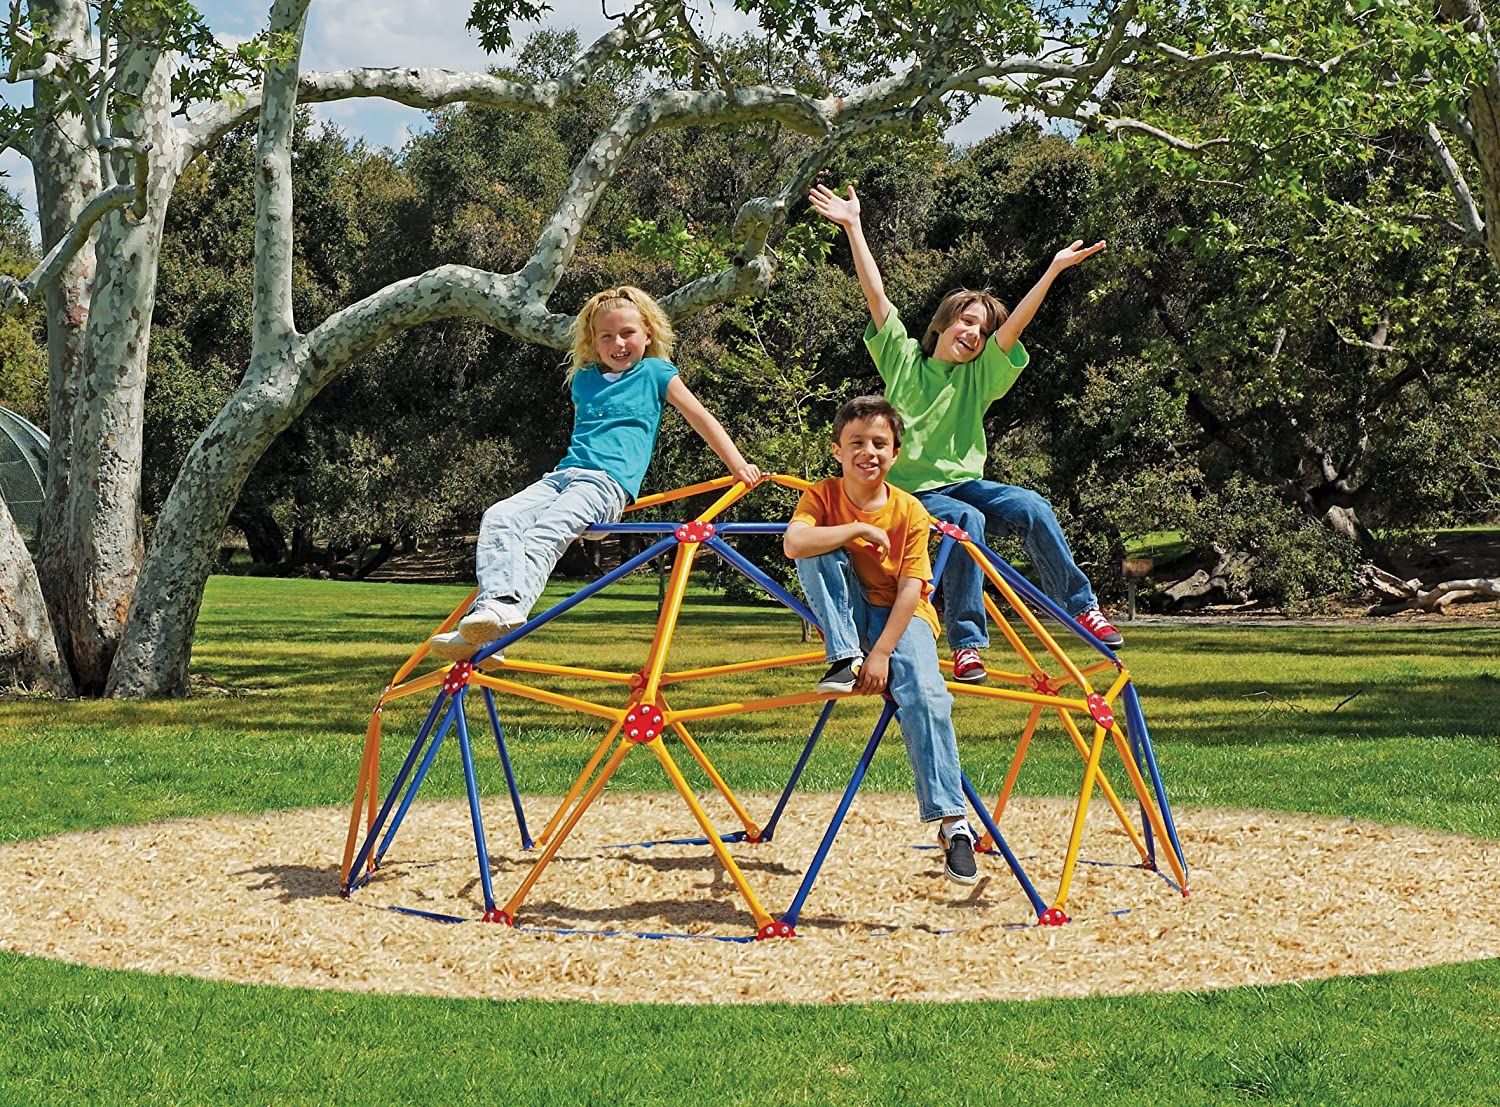 Sturdy Baby Toddler Swing Set Portable Kids Indoor Park Outdoor Playground Toy